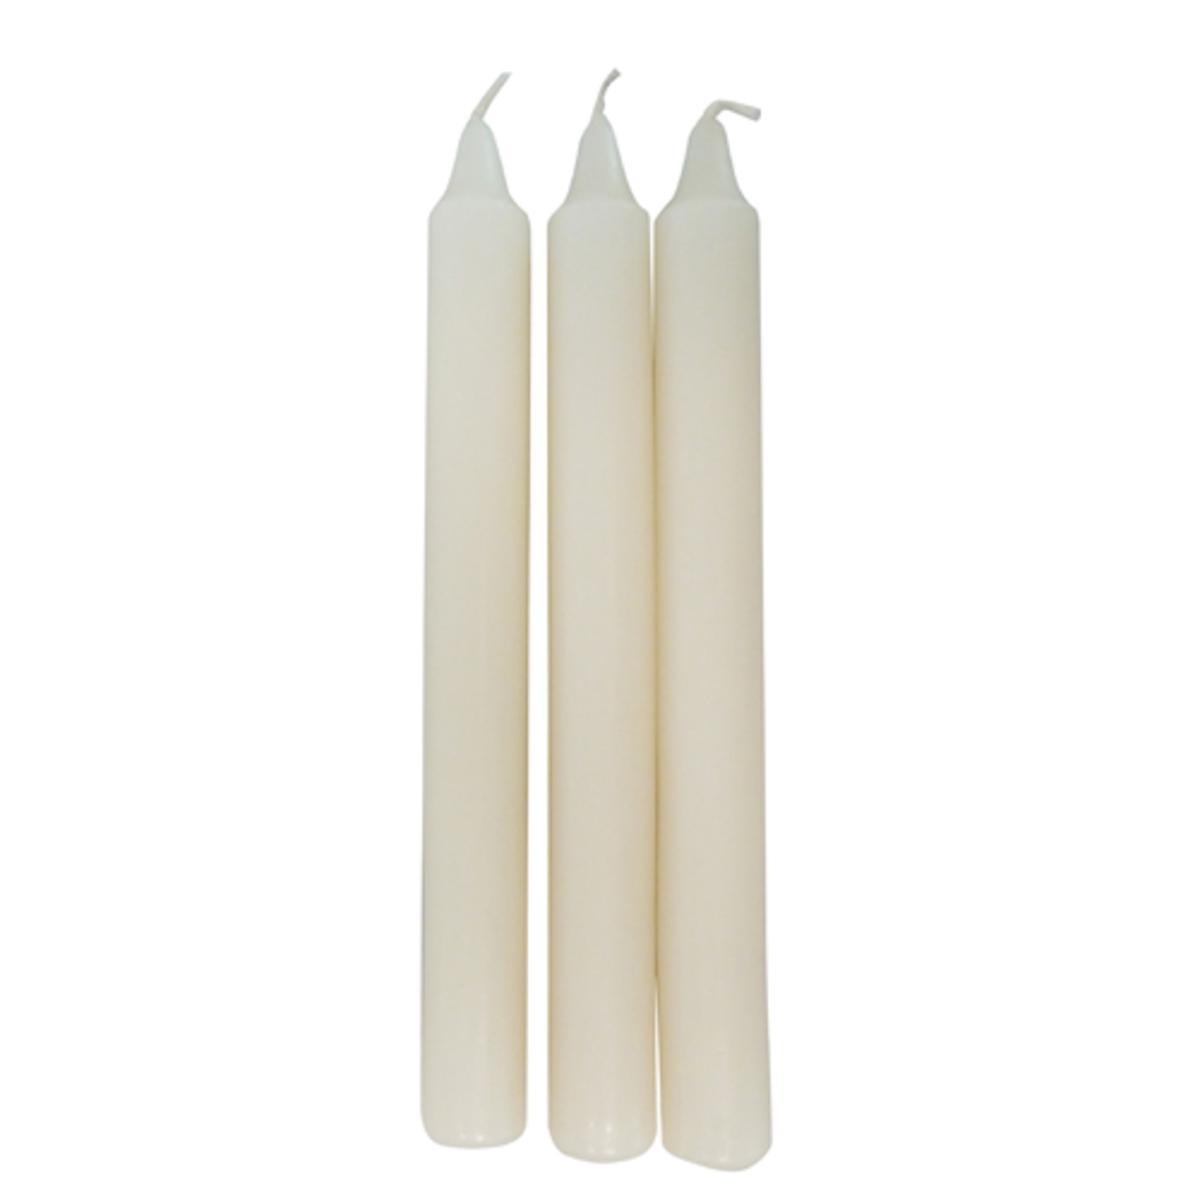 Bougies Blanches X10 - Leader Price